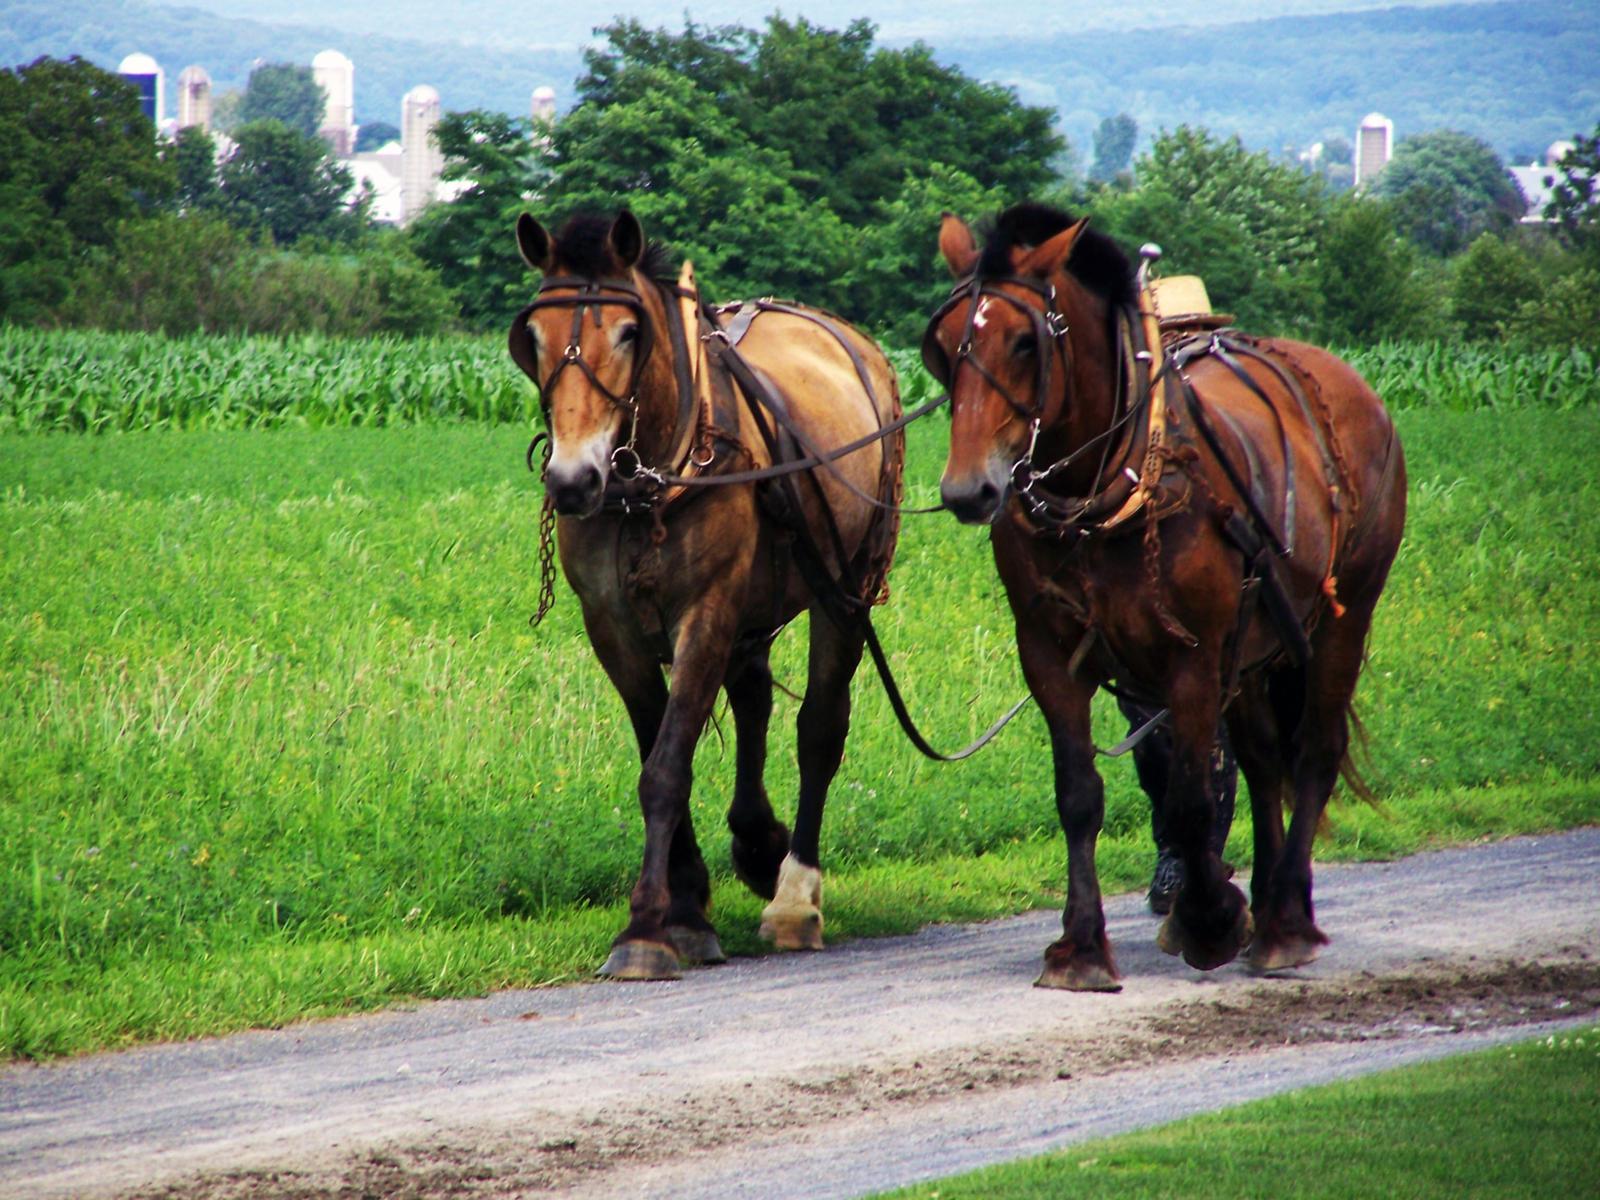 Very popular images: Amish Country